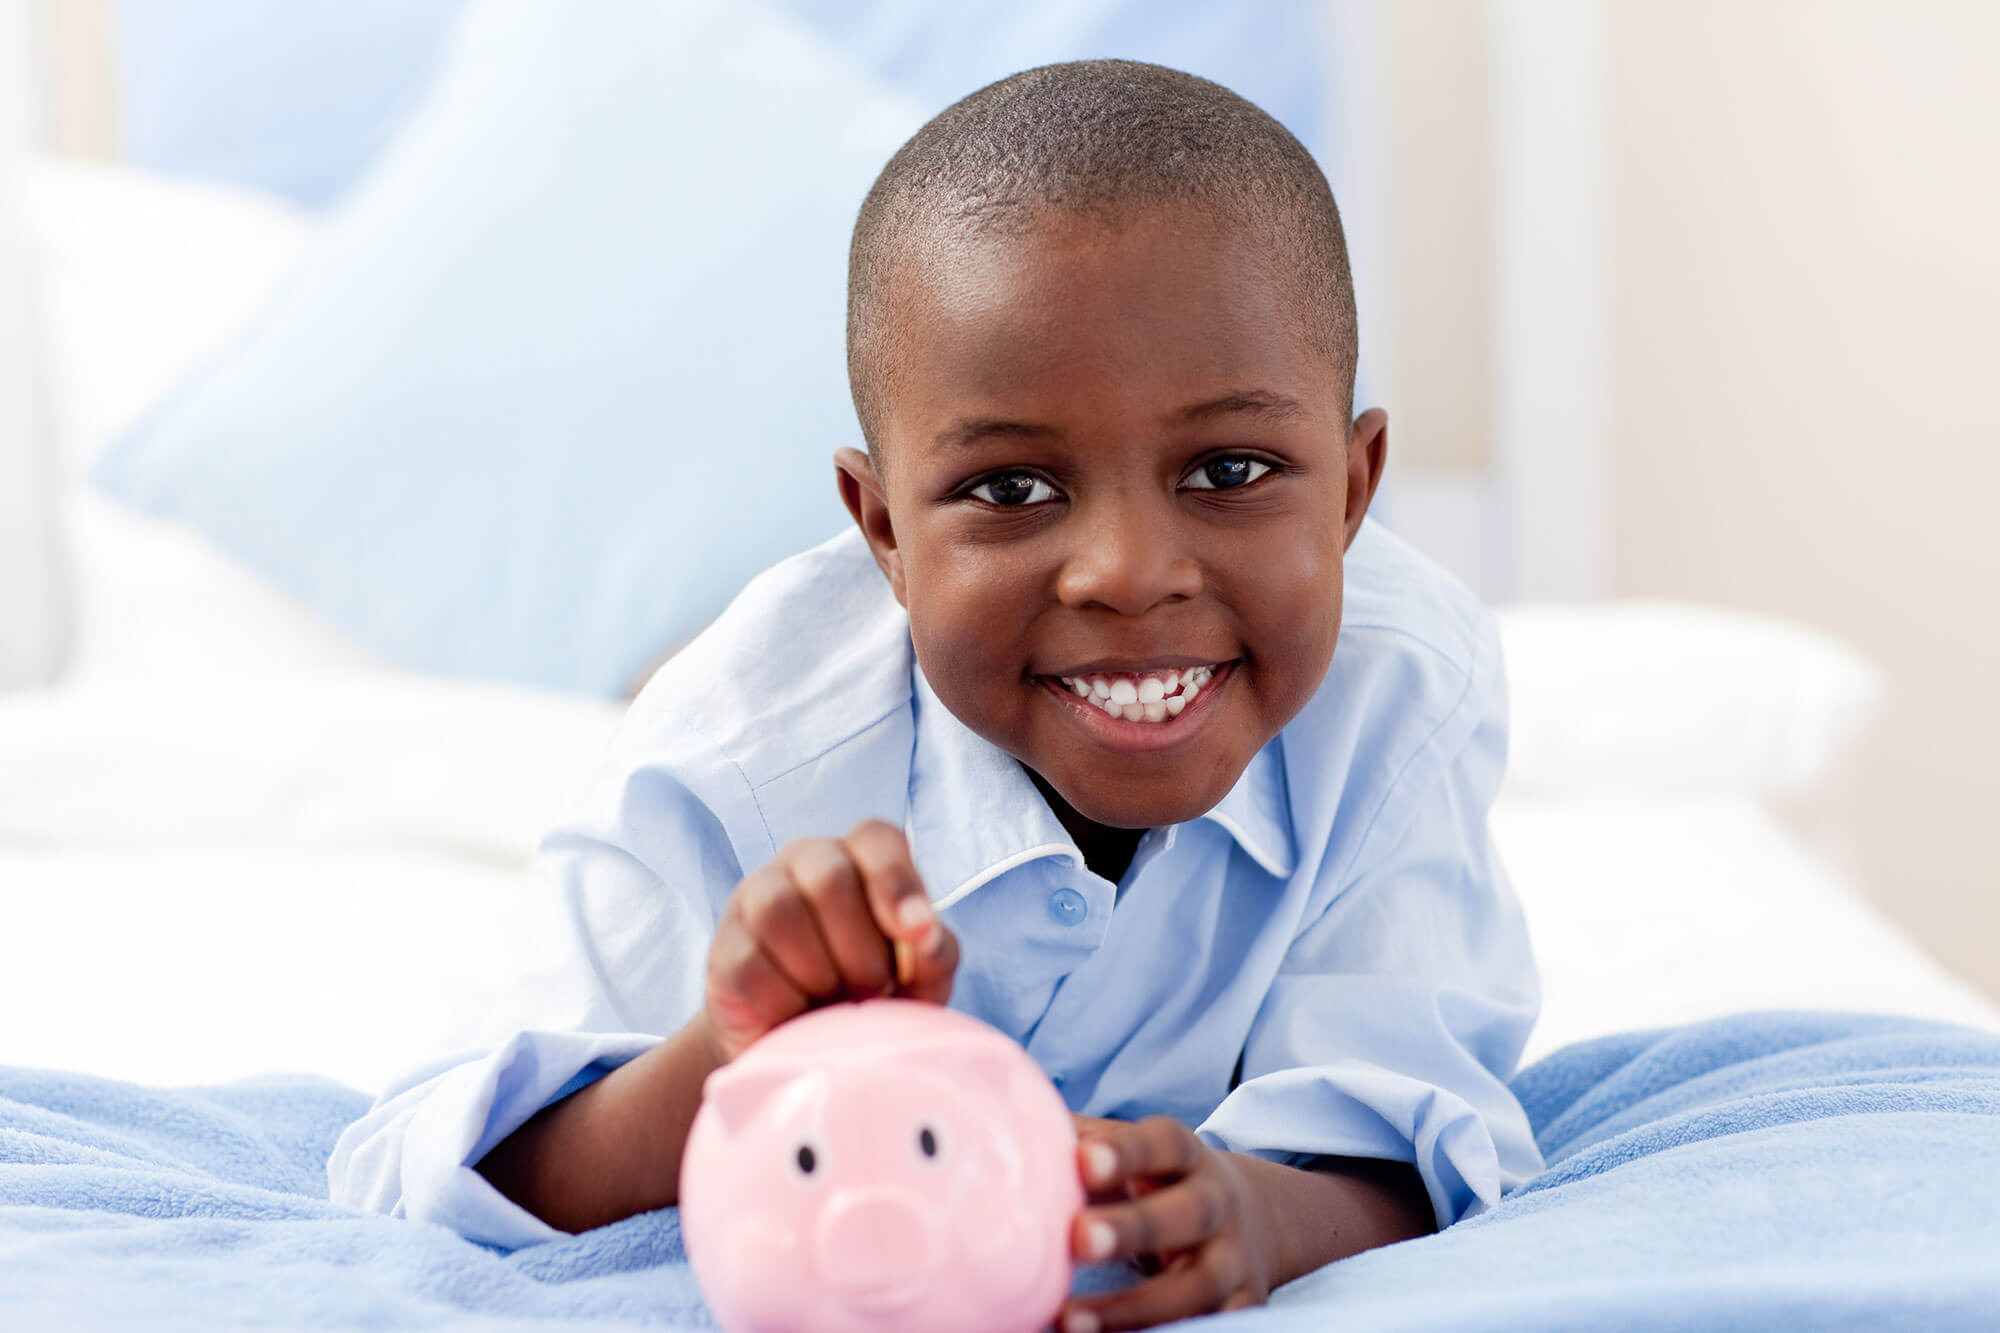 The value of a tax-free savings account (TFSA) is seen in the long term. Once the investment is sizeable enough, the tax-free aspect becomes noticeable on the growth. It may not make sense for you to open a tax-free investment for yourself, but starting one for your child could be a fantastic idea.